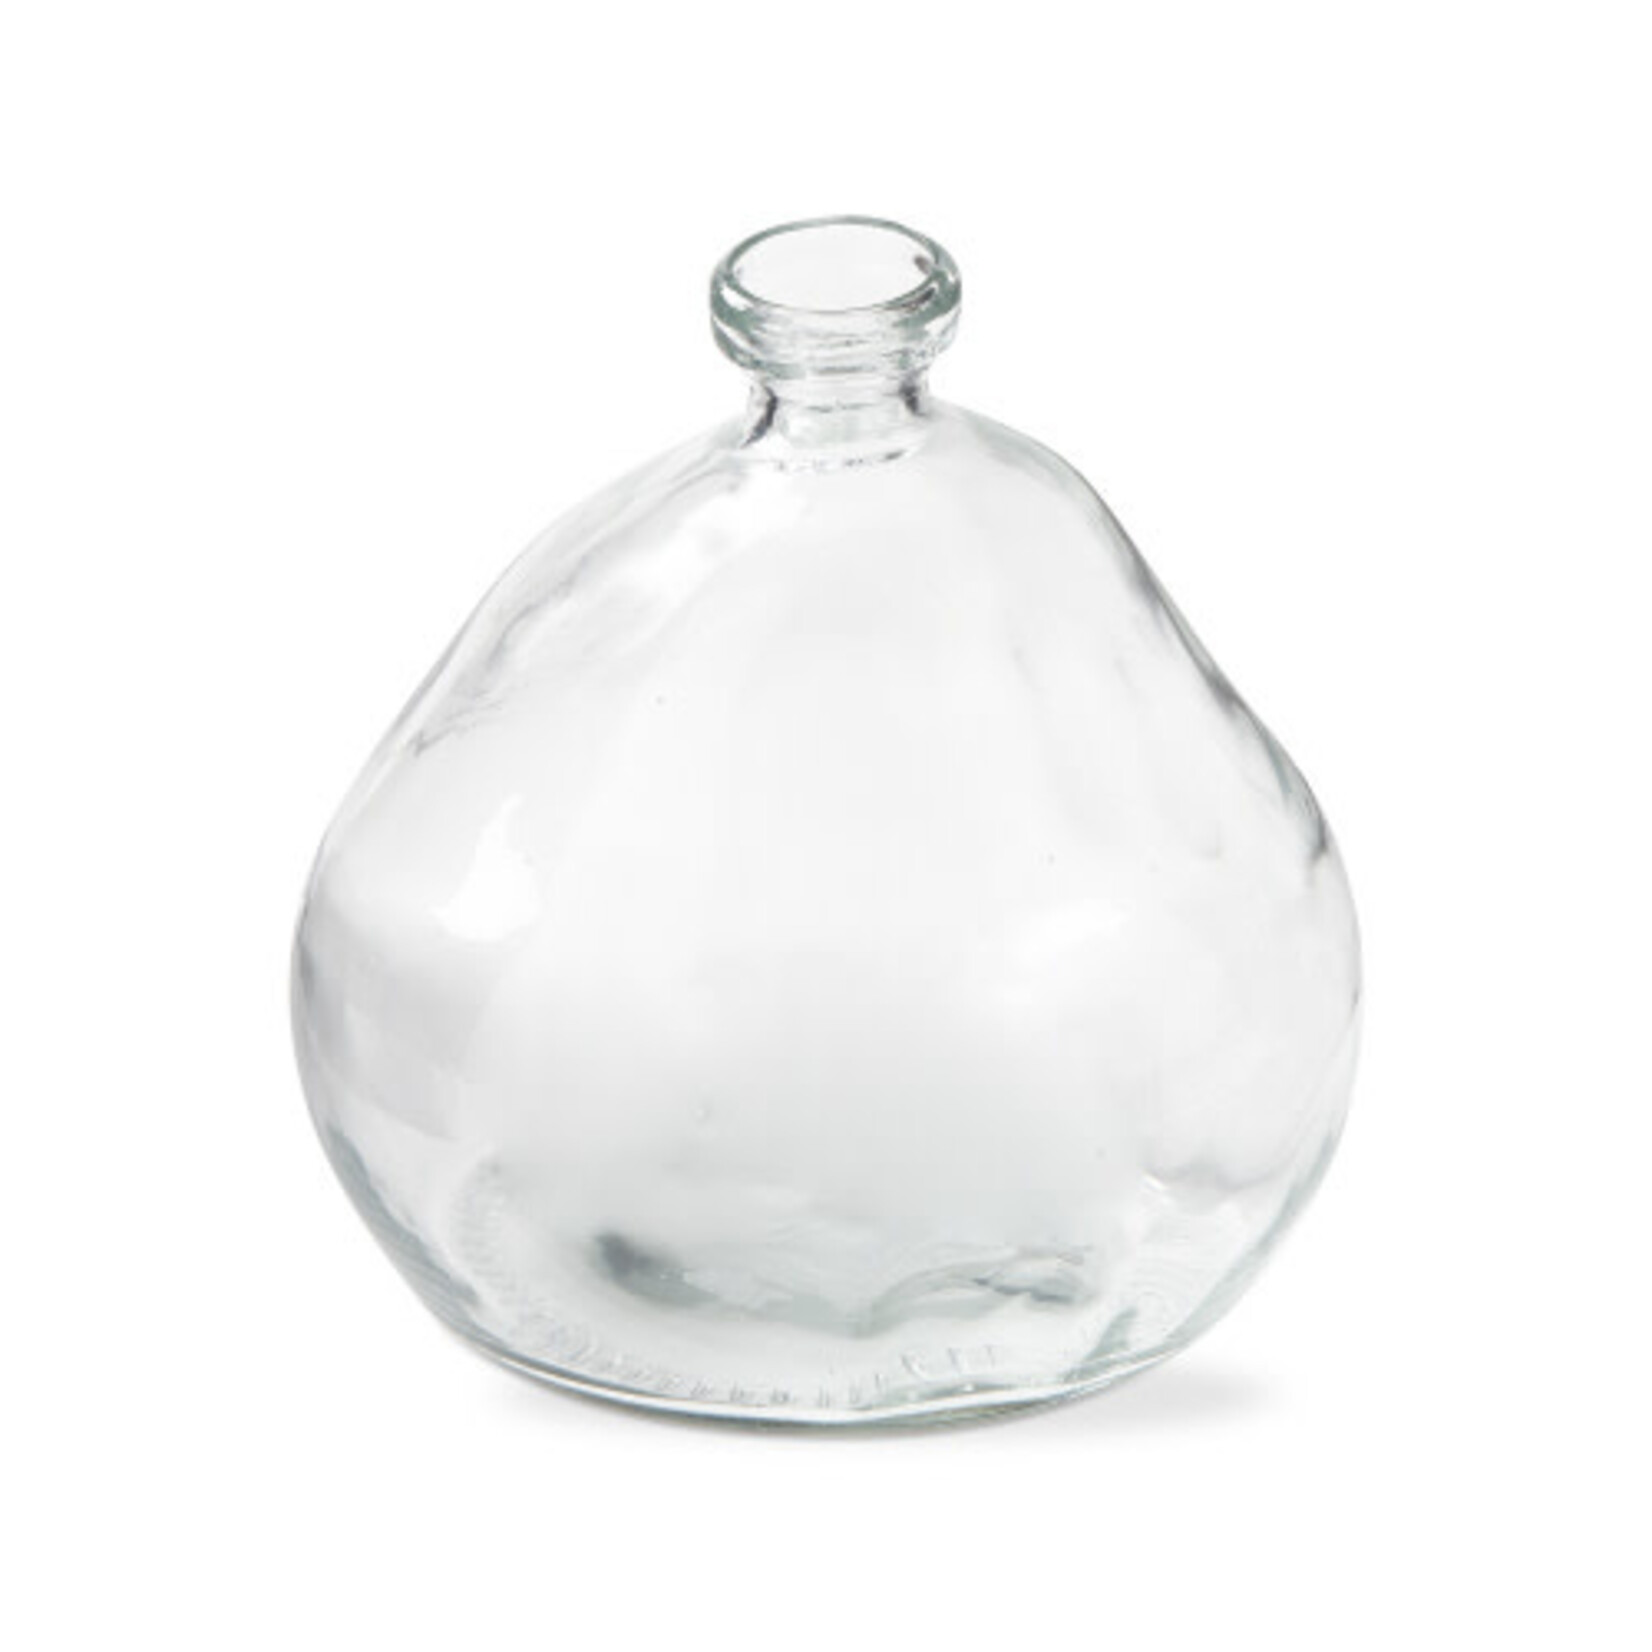 Pismo Recycled Clear Short Vase - 7"x6.7"